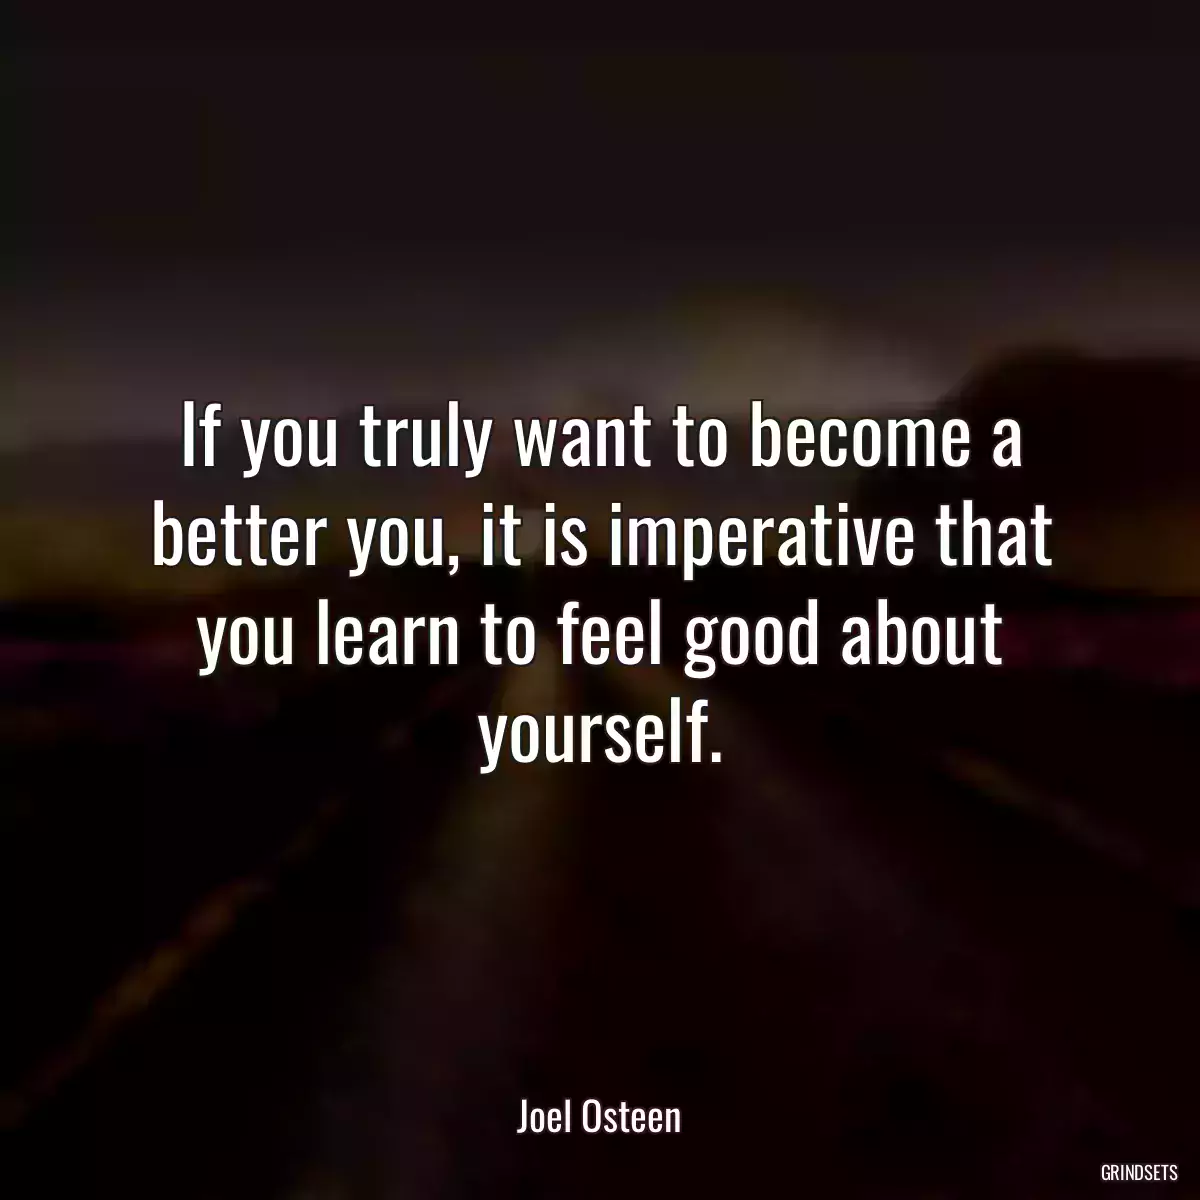 If you truly want to become a better you, it is imperative that you learn to feel good about yourself.